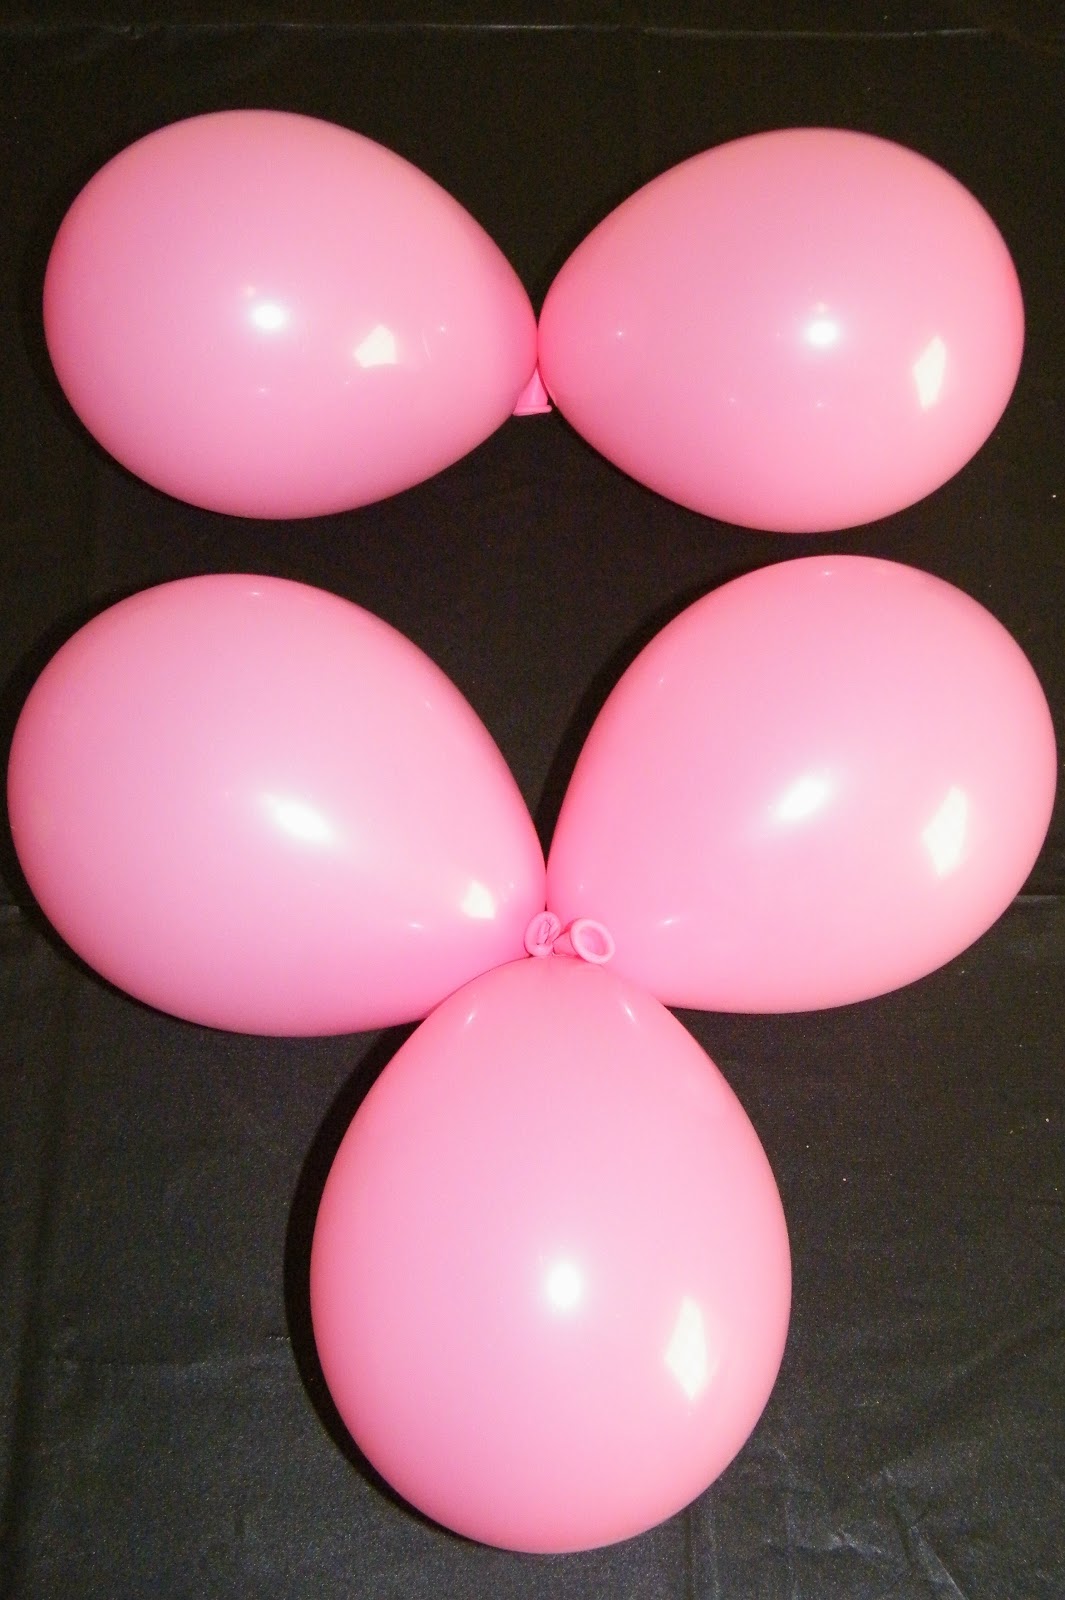 Make Your Own Balloon Decorations How To Make a Balloon